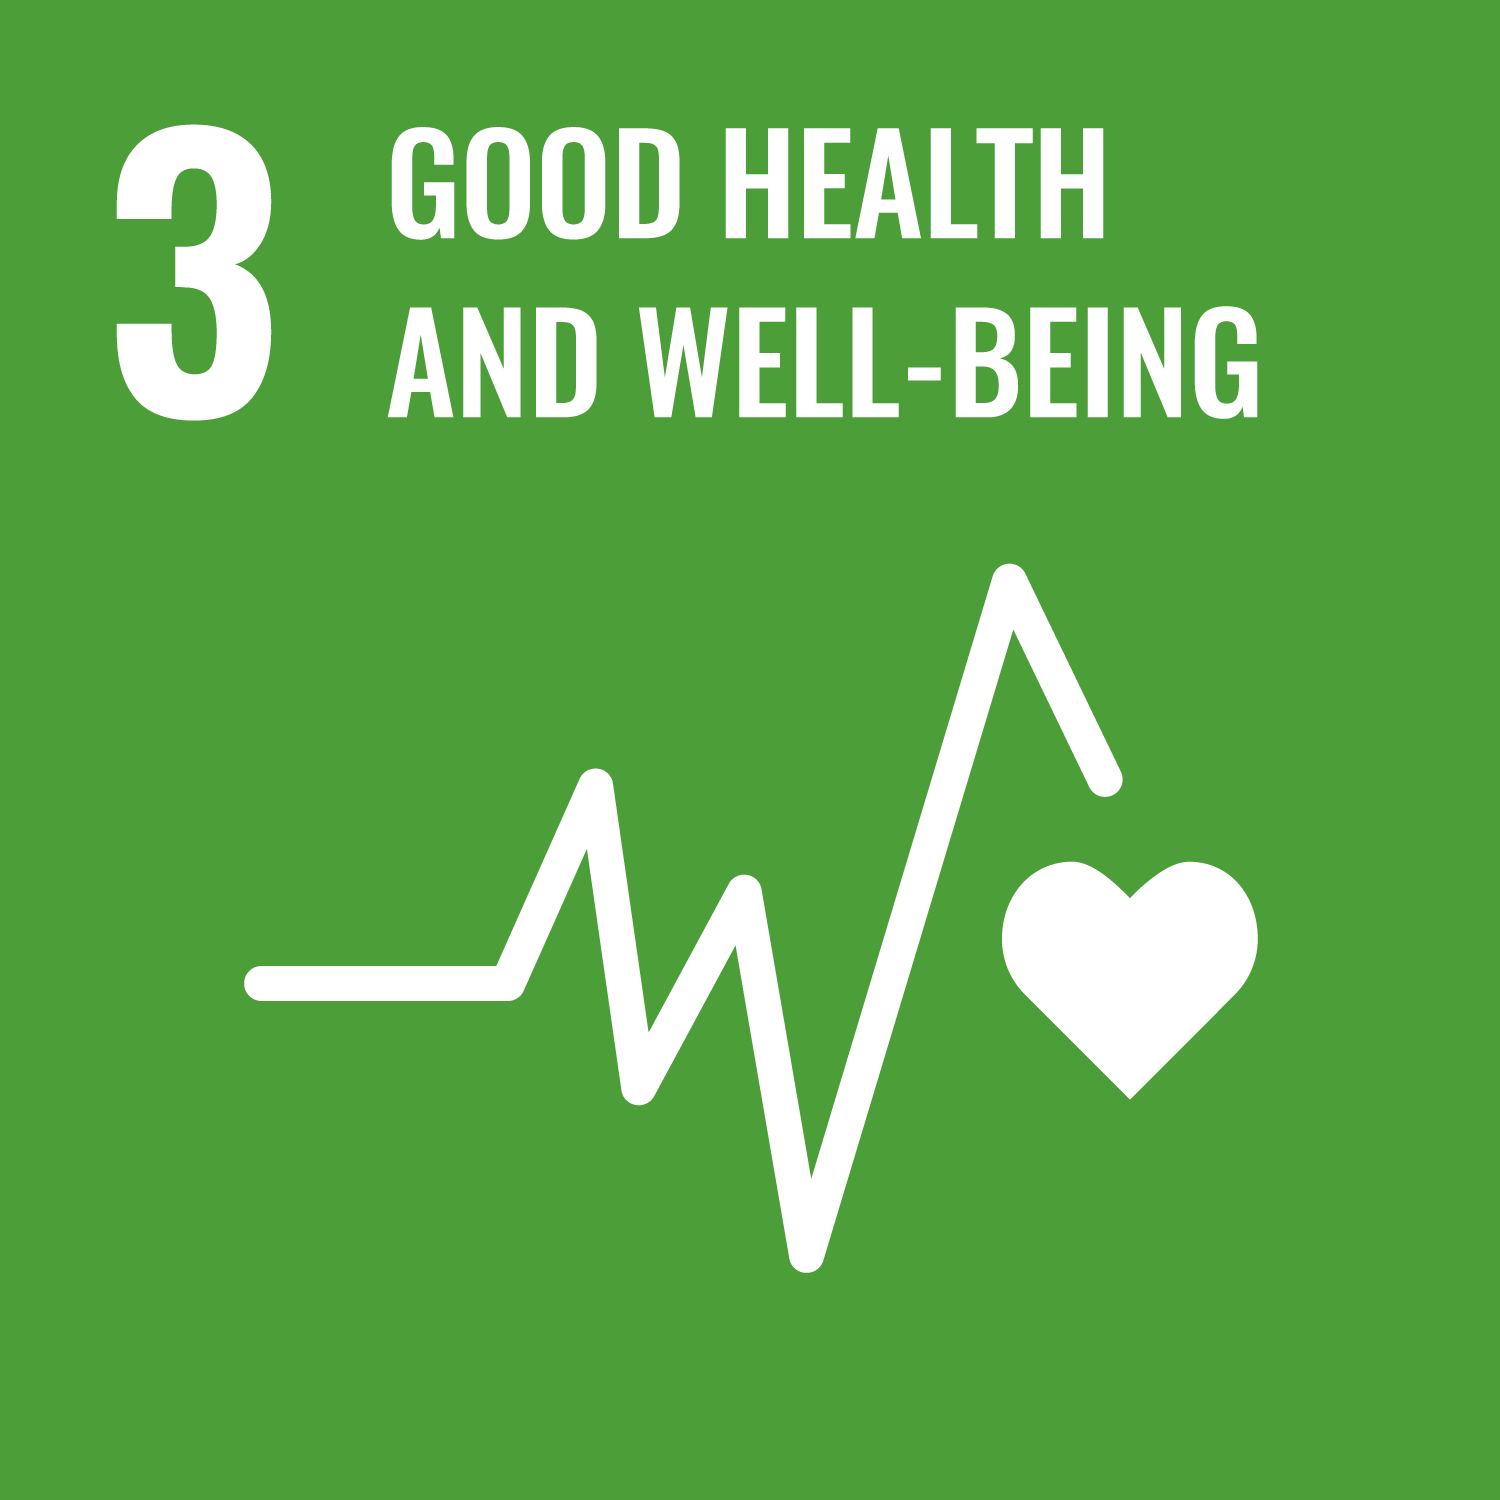 UN sustainable development goal 3 good health and well-being